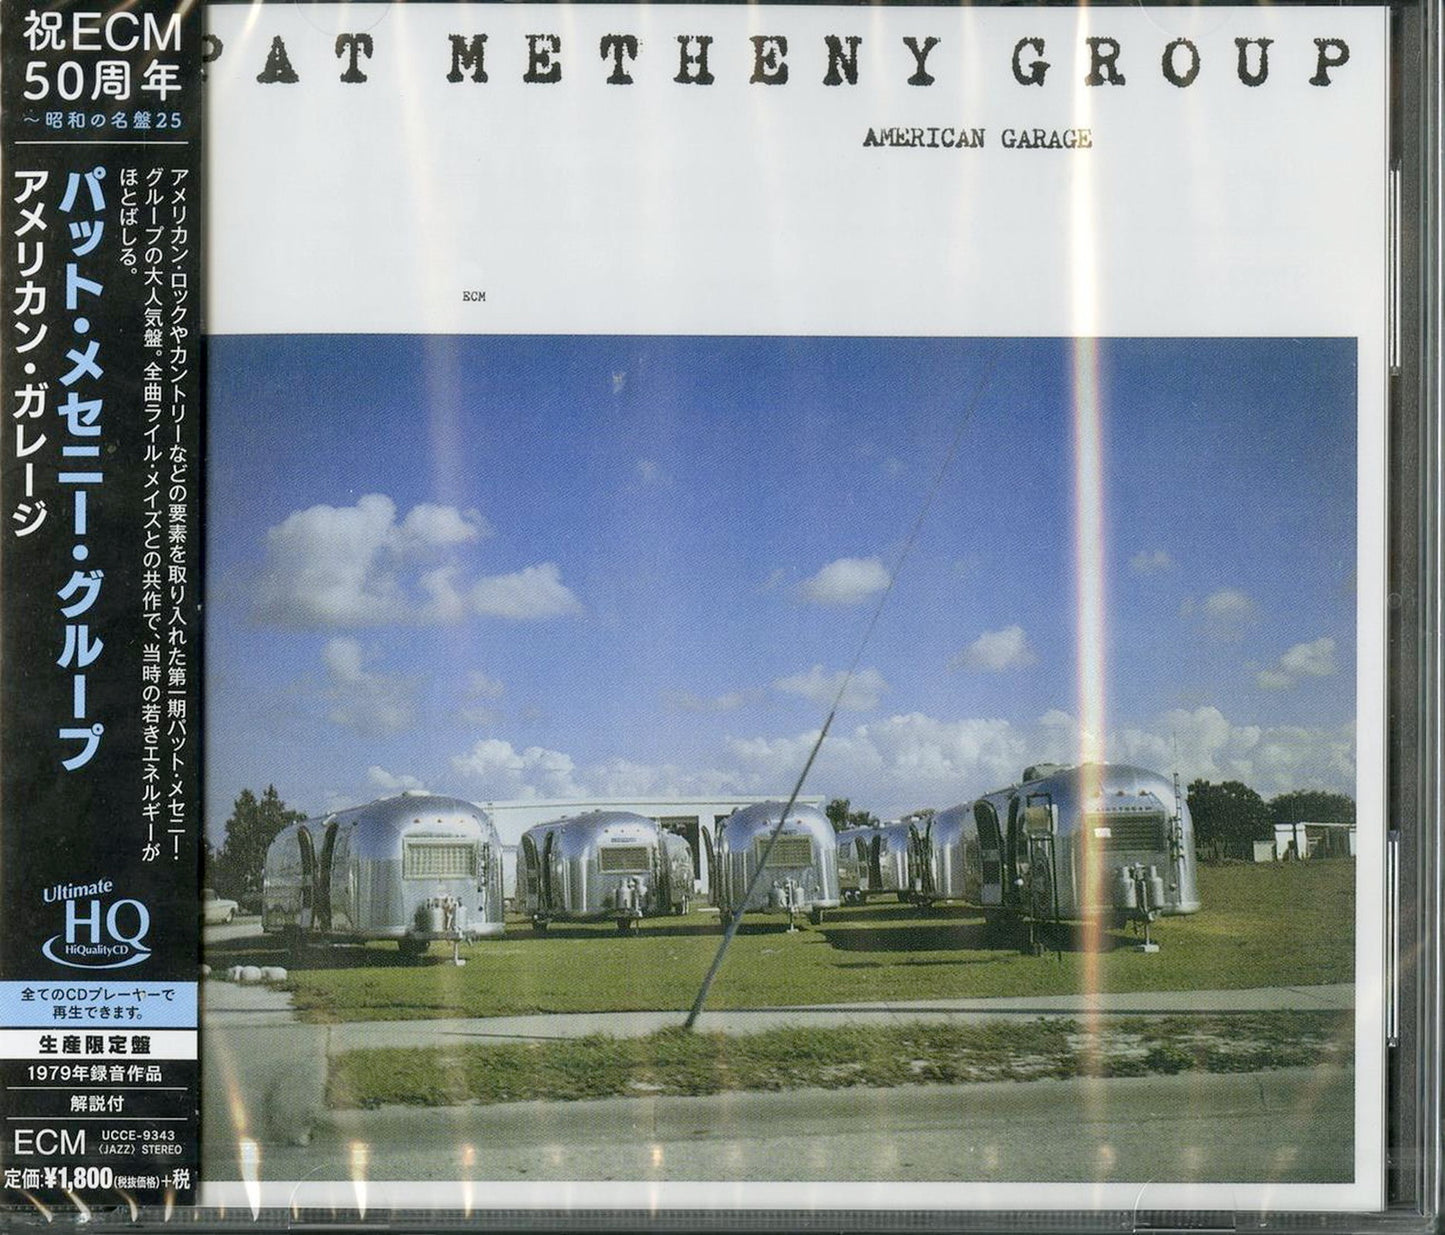 Pat Metheny Group - American Garage - UHQCD Limited Edition